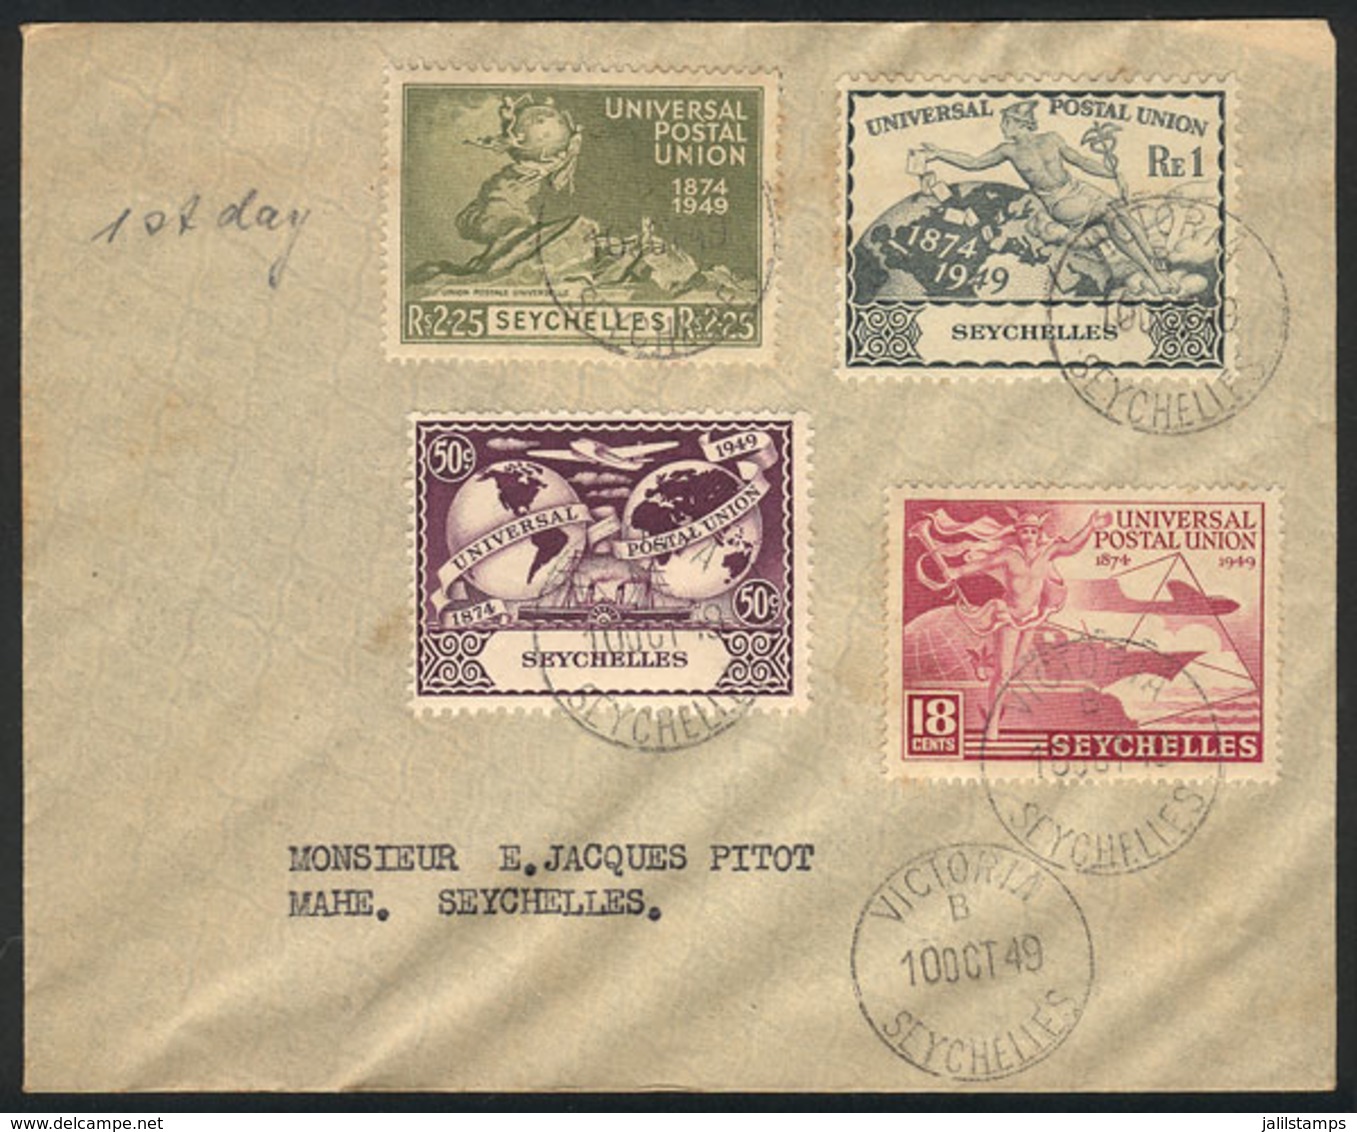 SEYCHELLES: Cover Franked With The 4 Values Of The UPU Anniversary Issue, Postmarked 10/OC/1949 (FDI), VF! - Seychelles (...-1976)